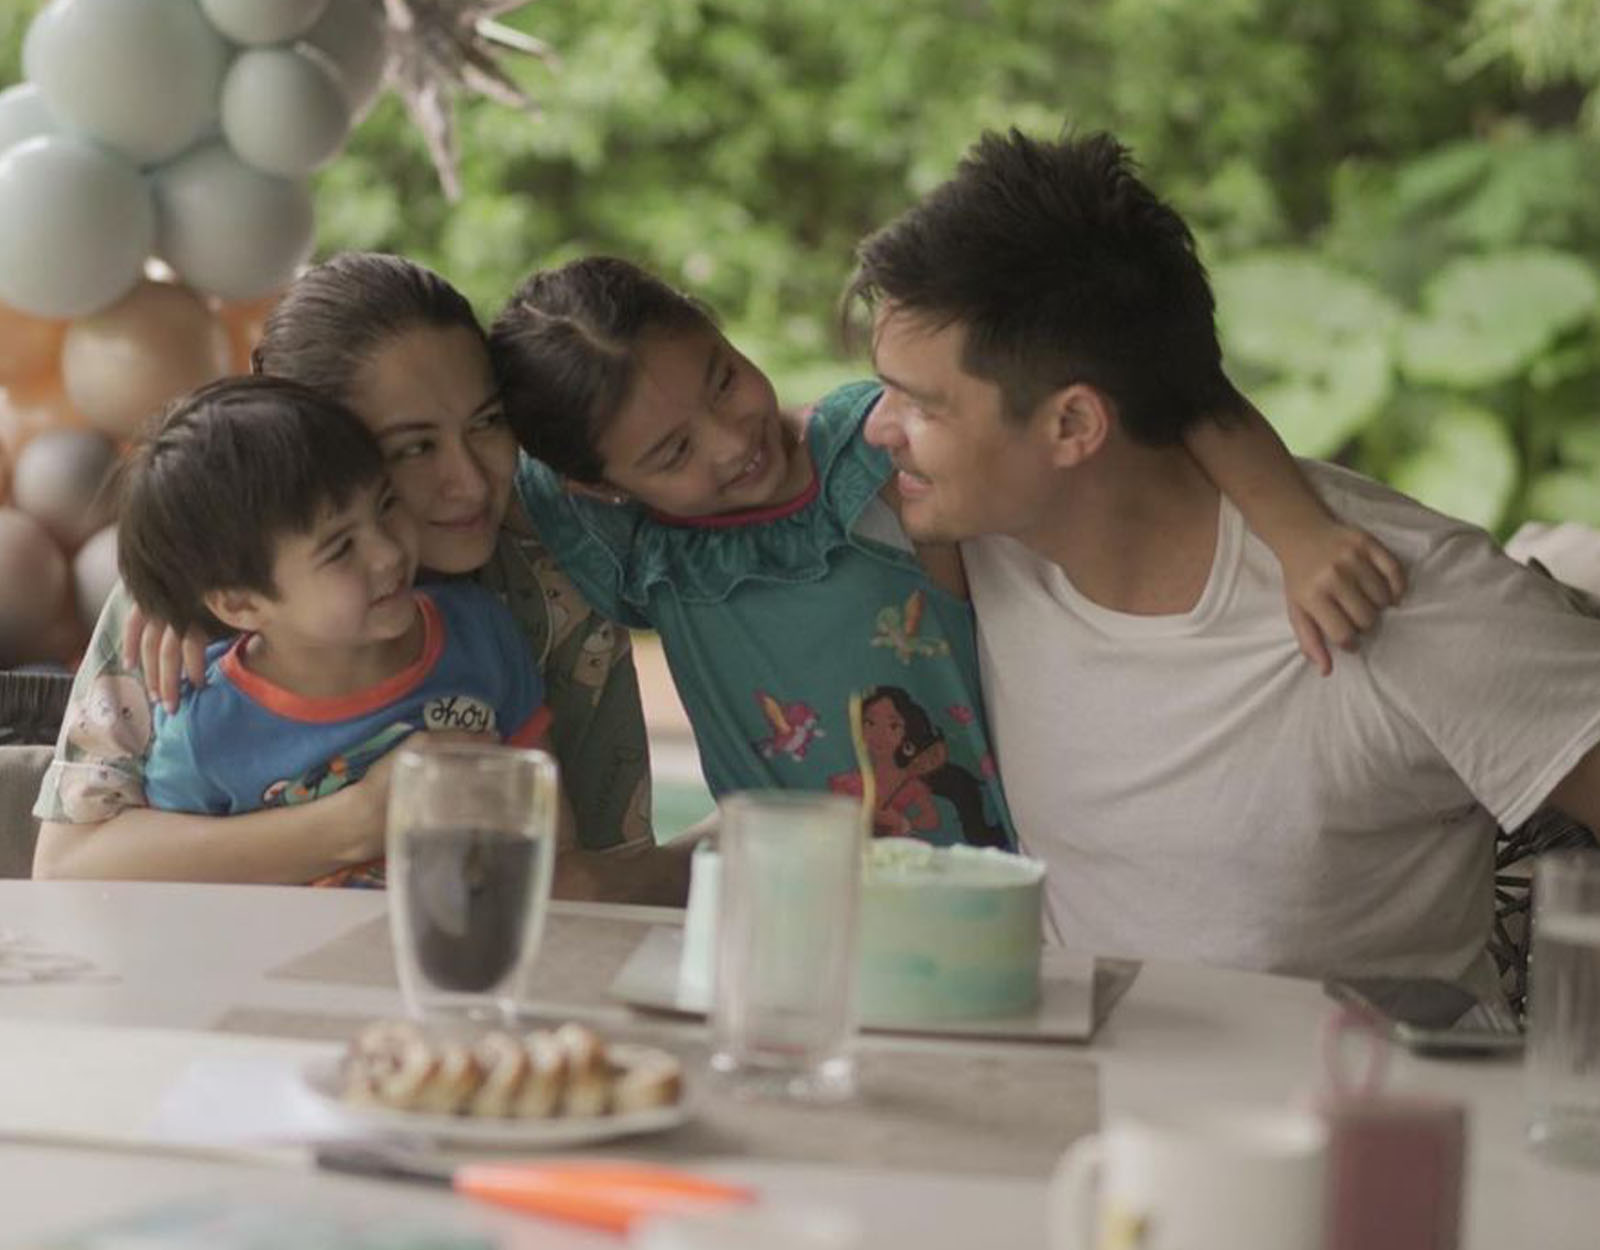 Dingdong Dantes with his family